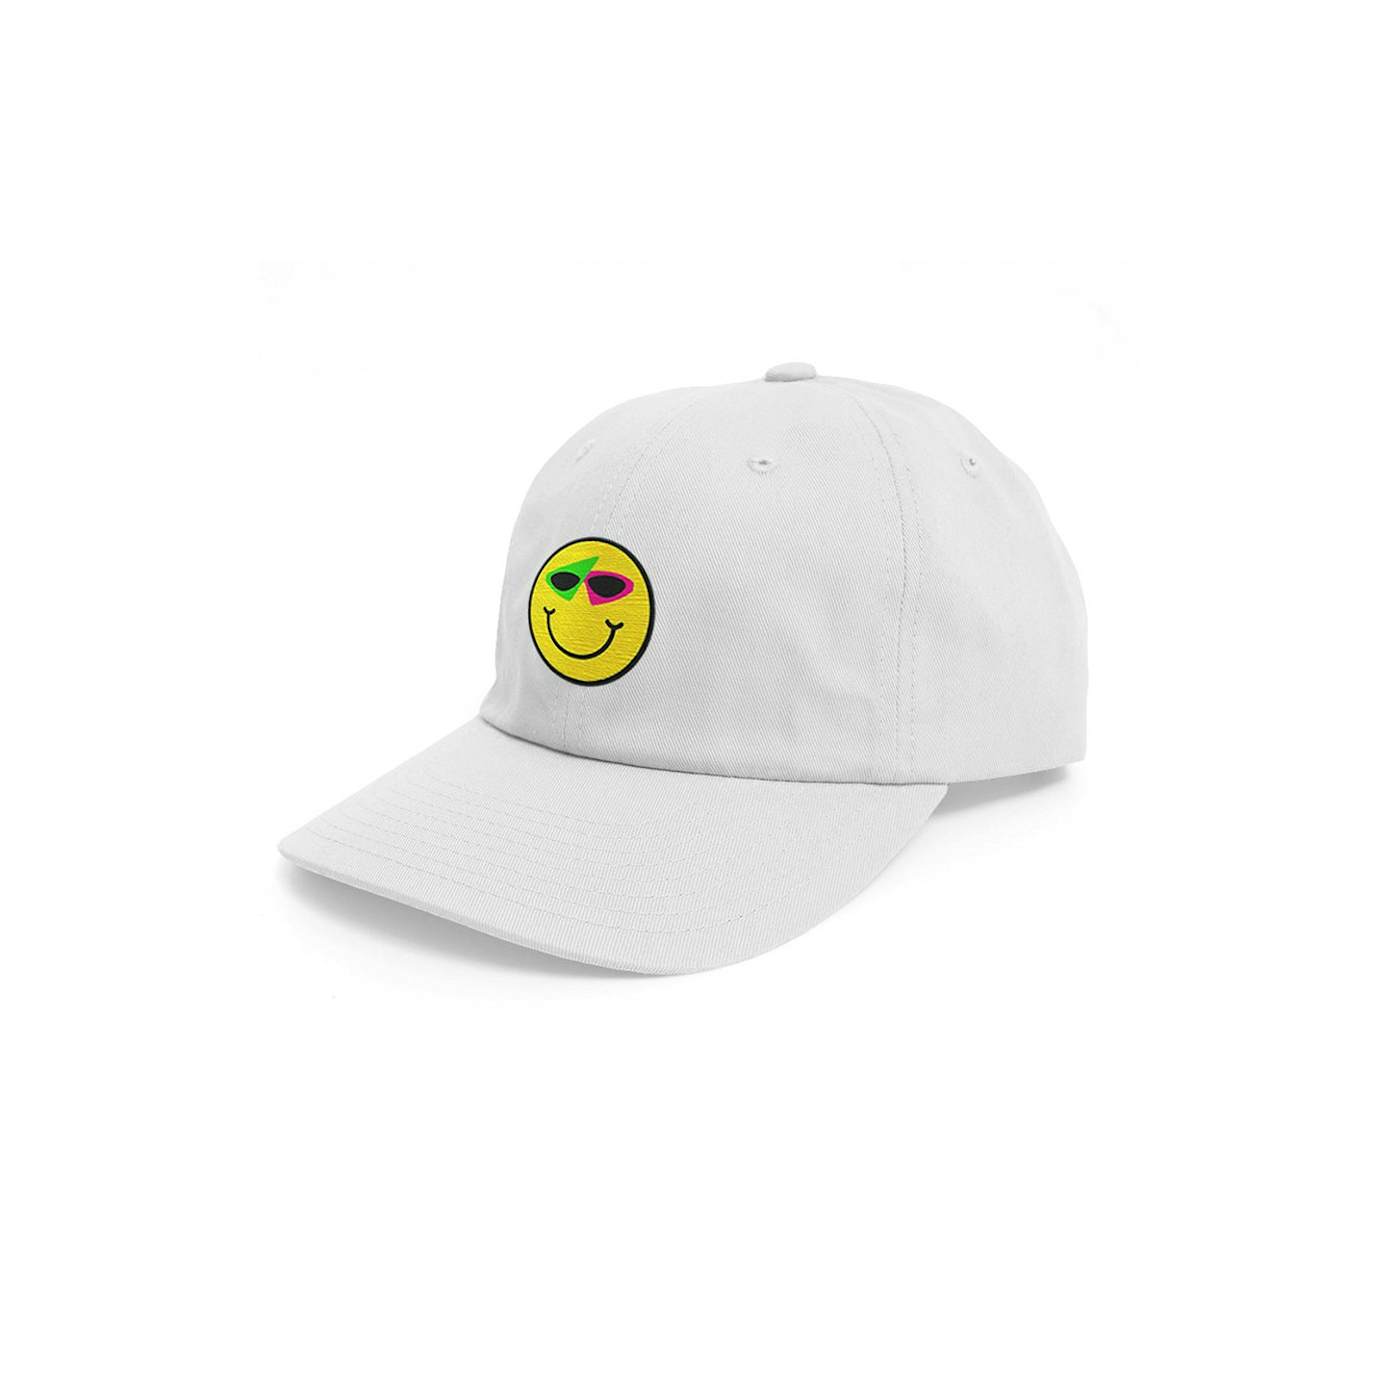 Roy Purdy Smiley Hat White